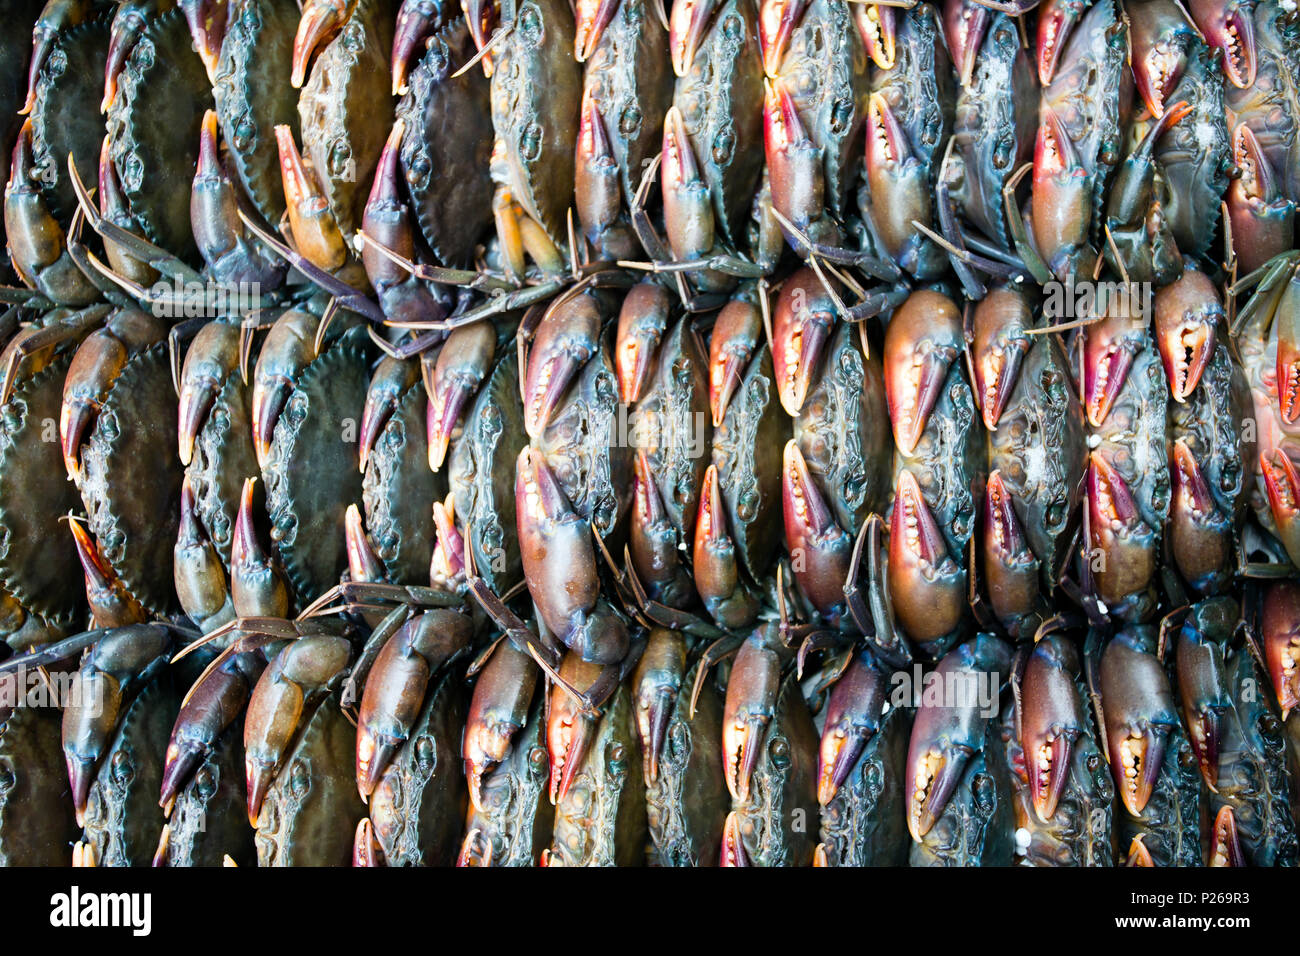 Stack of fresh live crabs at Ben Thanh Market located in District 1, Ho Chi Minh City, Vietnam. Stock Photo